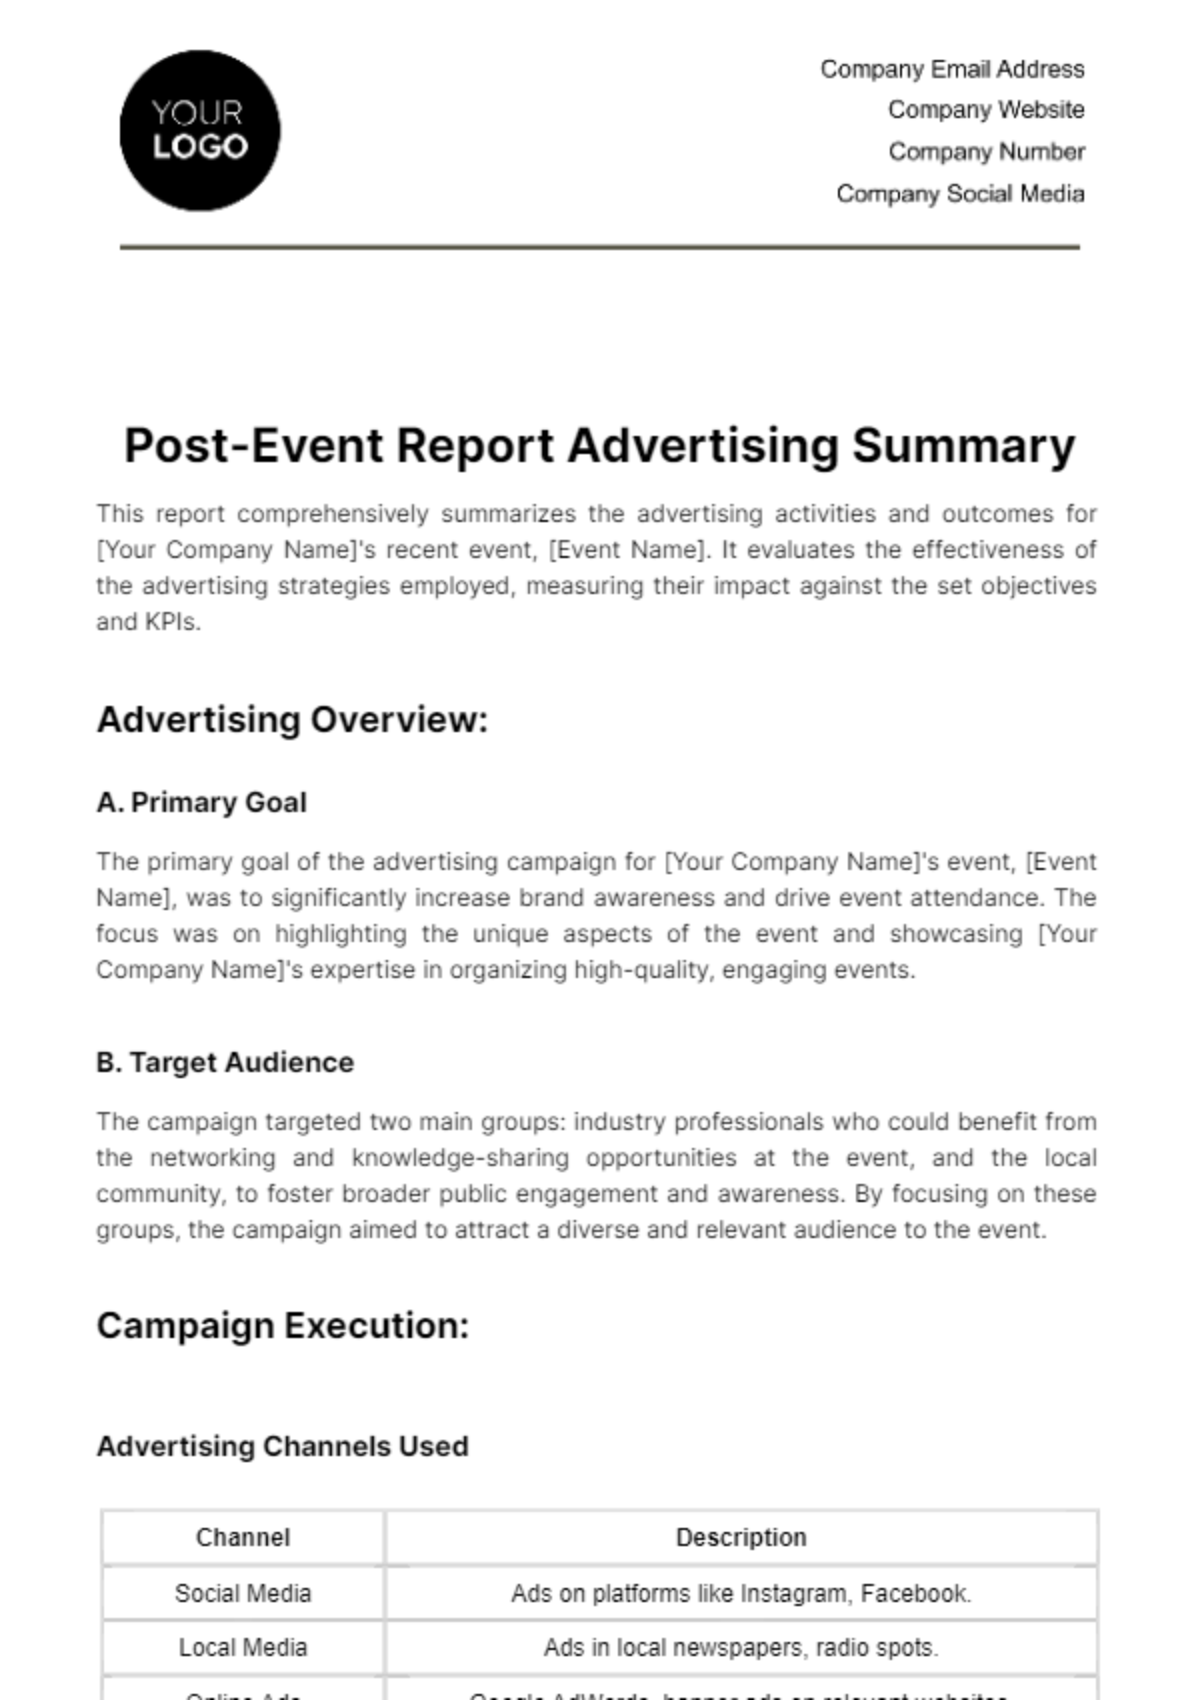 Free Post-Event Report Advertising Summary Template